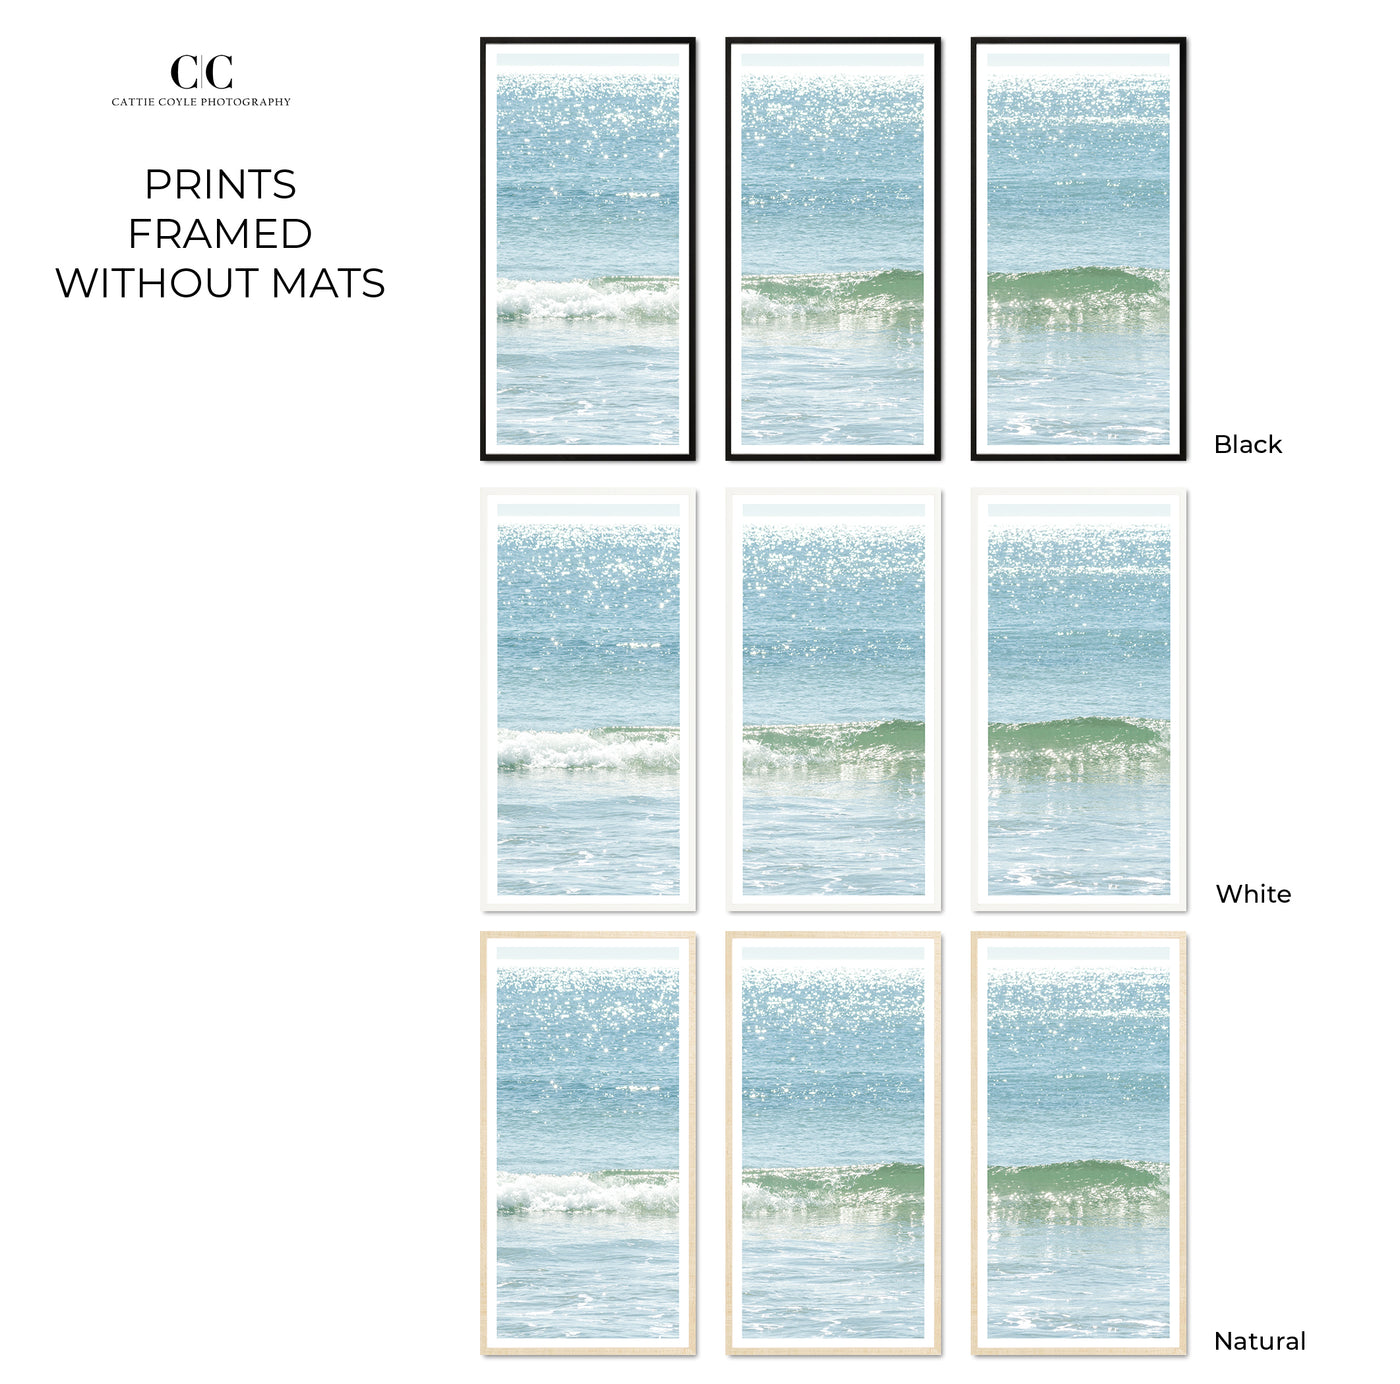 Ocean Waves No 11 - 3 piece wall art framed without mats by Cattie Coyle Photography